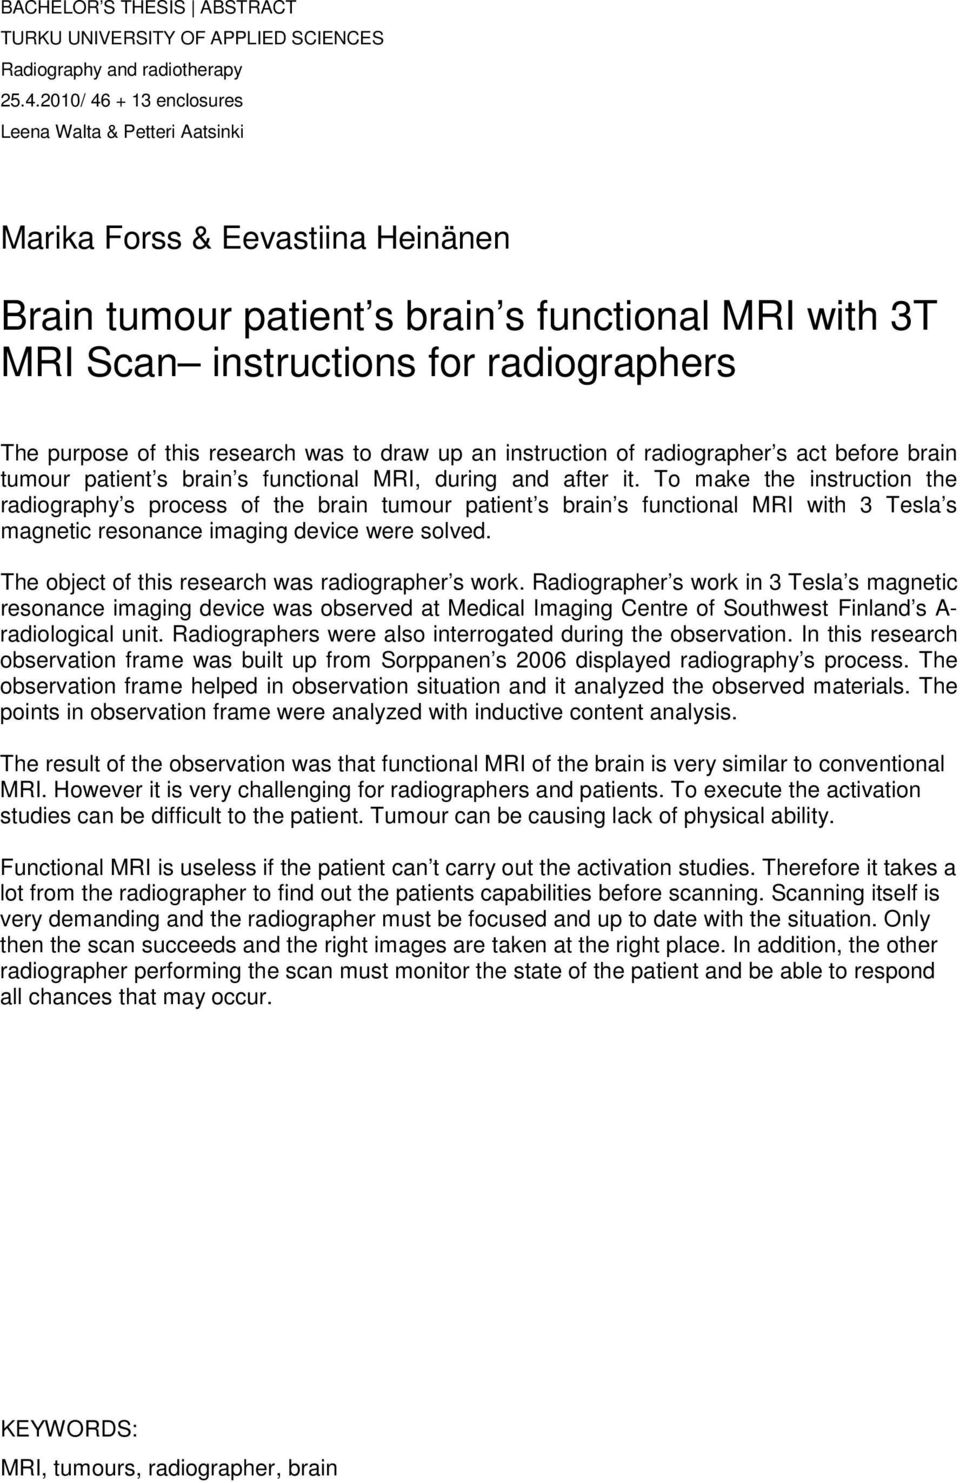 this research was to draw up an instruction of radiographer s act before brain tumour patient s brain s functional MRI, during and after it.